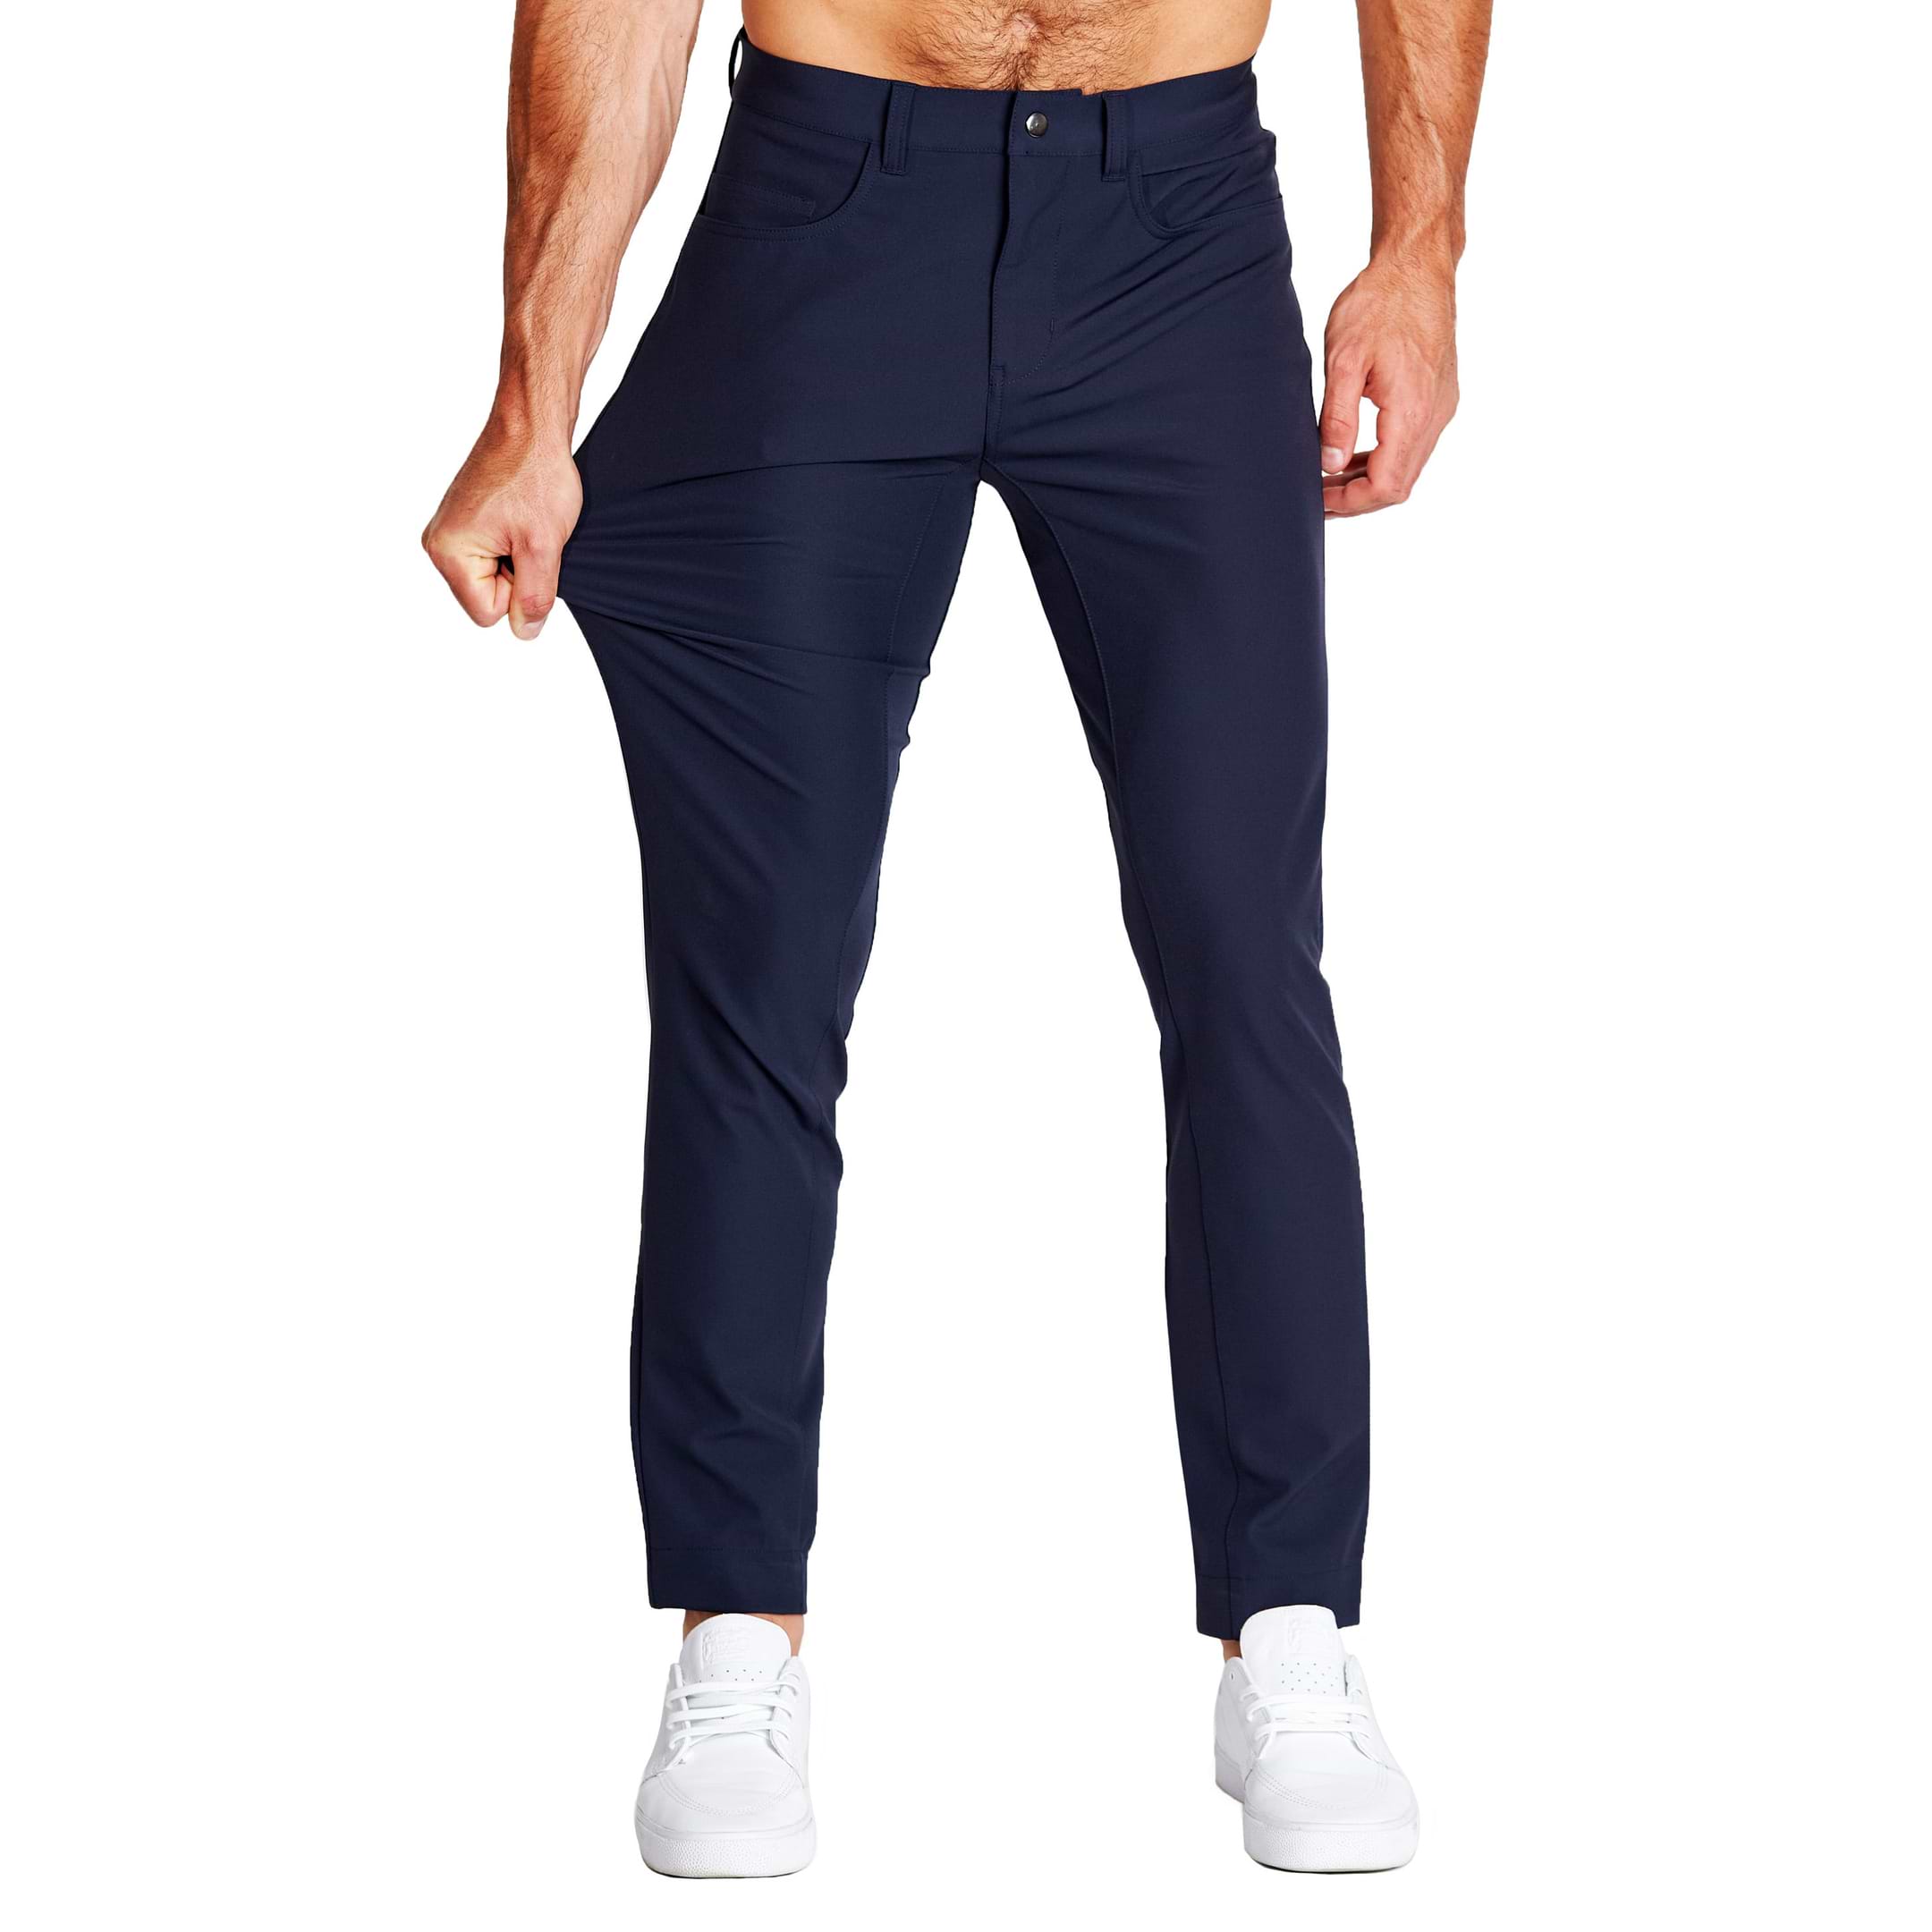 Muscle Fitting Hyper Stretch Chinos  Built for Athletes, Made to Perform–  Fitizen